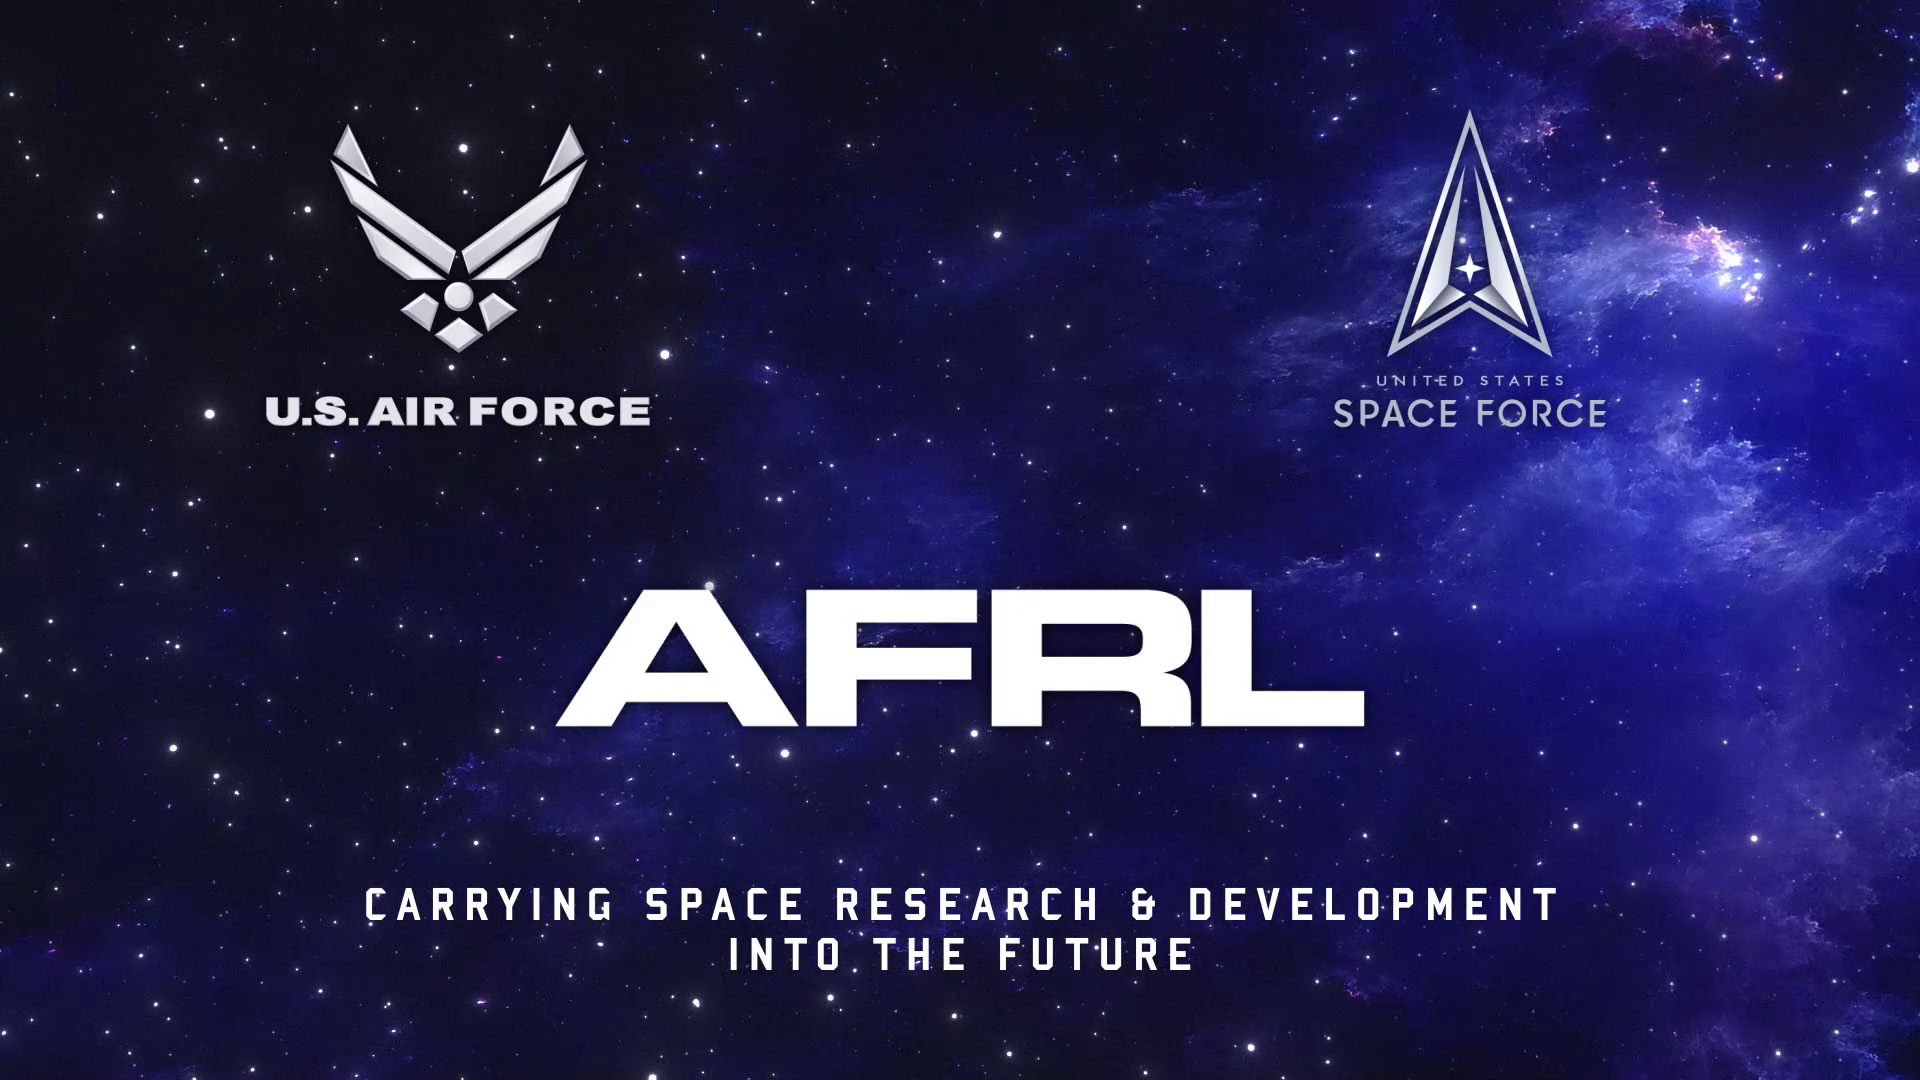 Image of United States Air Force, United States Space Force, and AFRL logos on top of stars and galaxy background. The words "Carrying Space Research and Development into the Future" appear below the logos.